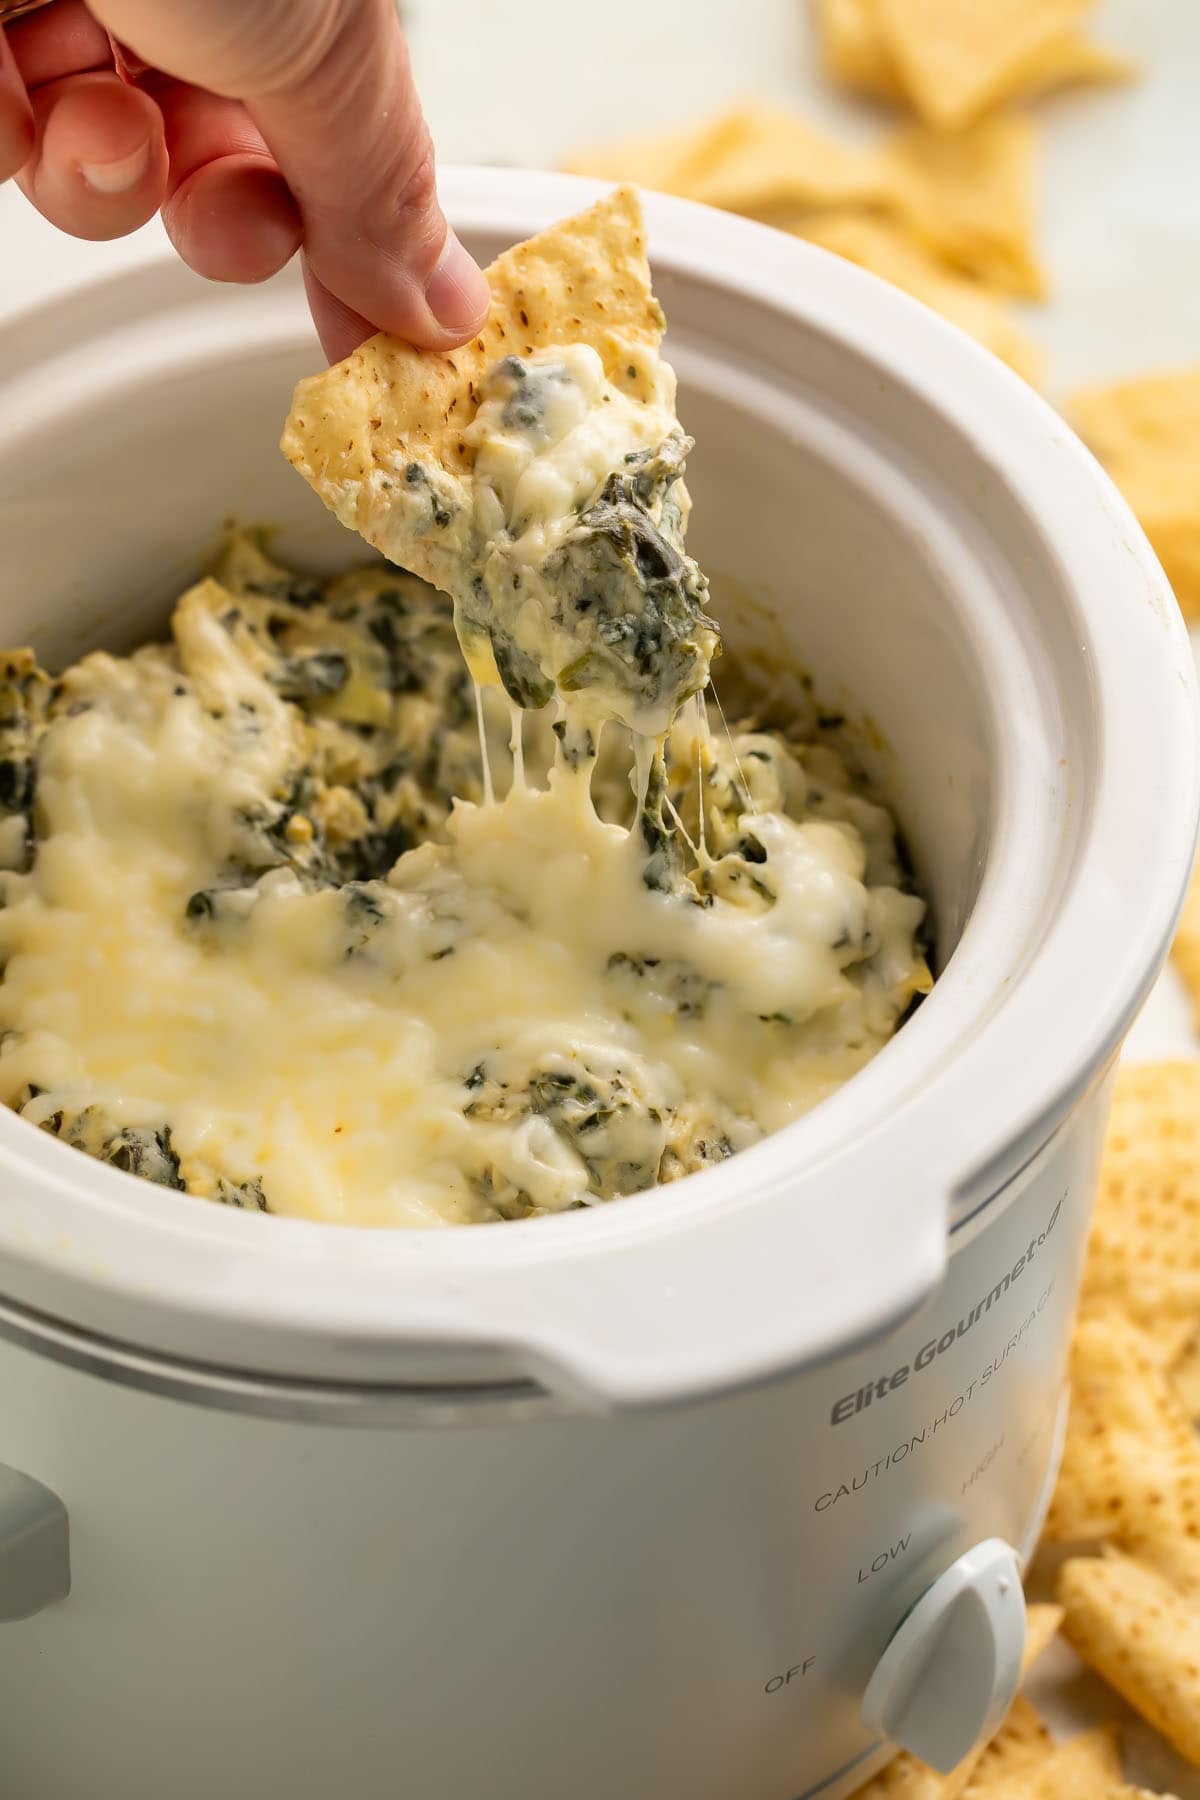 A woman holds a tortilla chip as she uses it to scoop creamy, cheesy spinach artichoke dip out of a white Crockpot slow cooker.